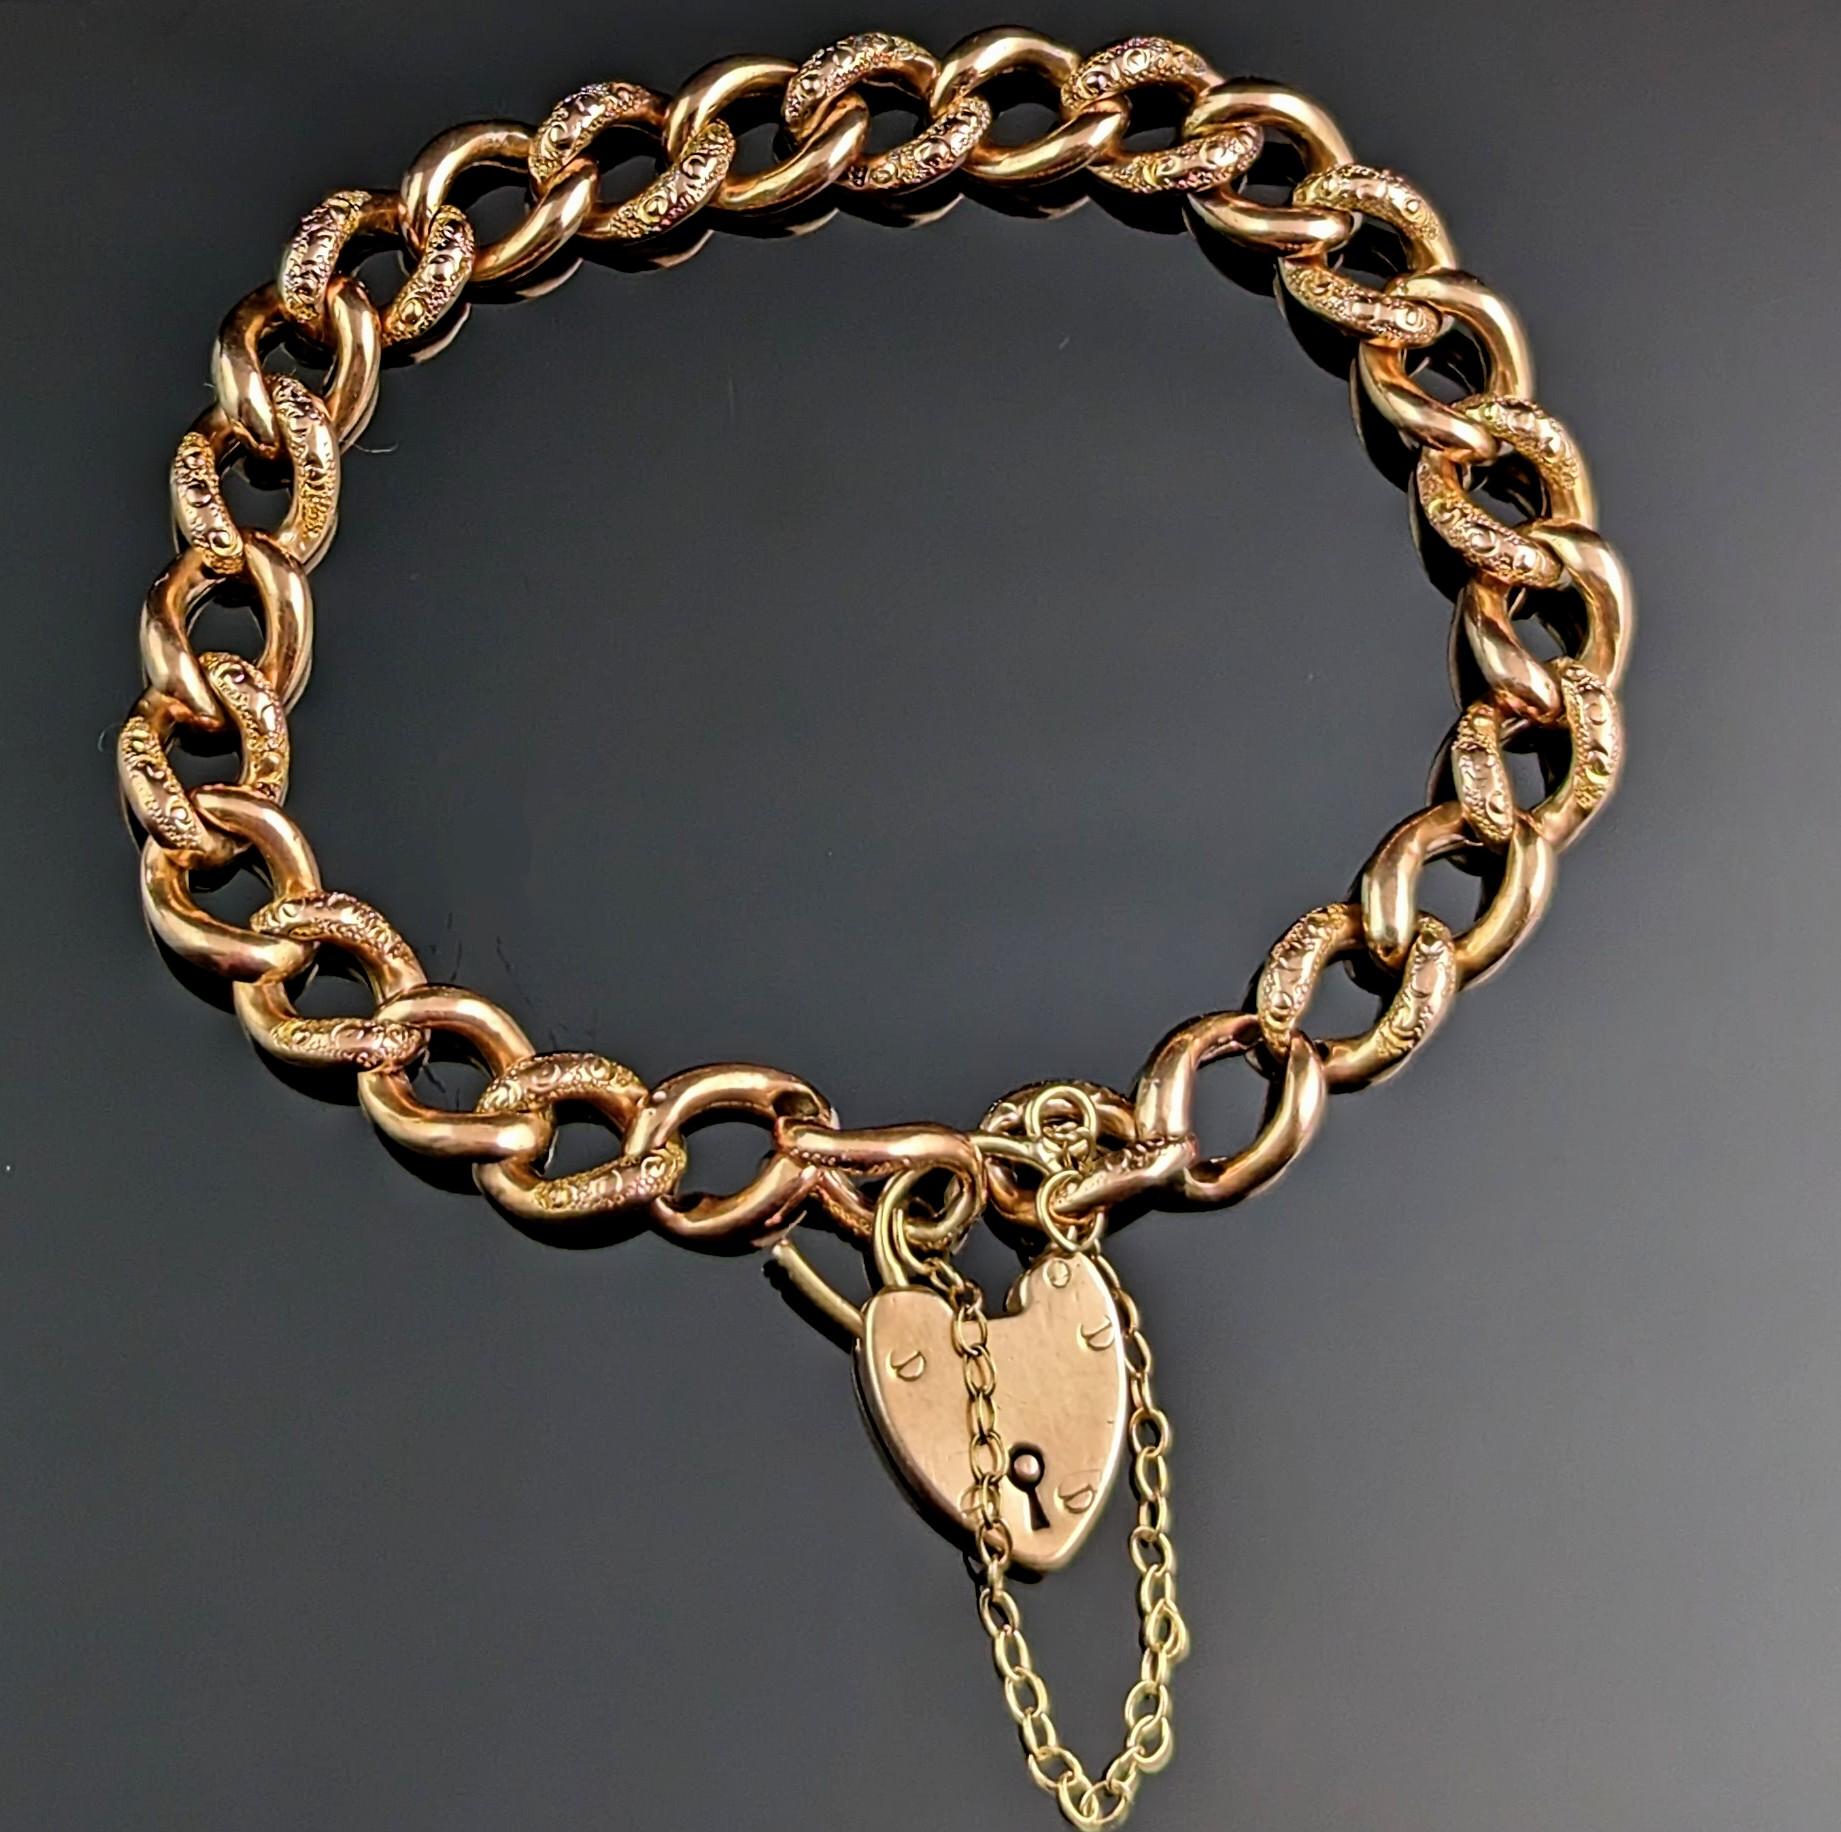 This antique 9kt gold curb link bracelet is both traditional and modern at the same time, made in the early 20th century yet it remains a style that it still relevant today.

If you are looking for a staple curb bracelet for your jewellery